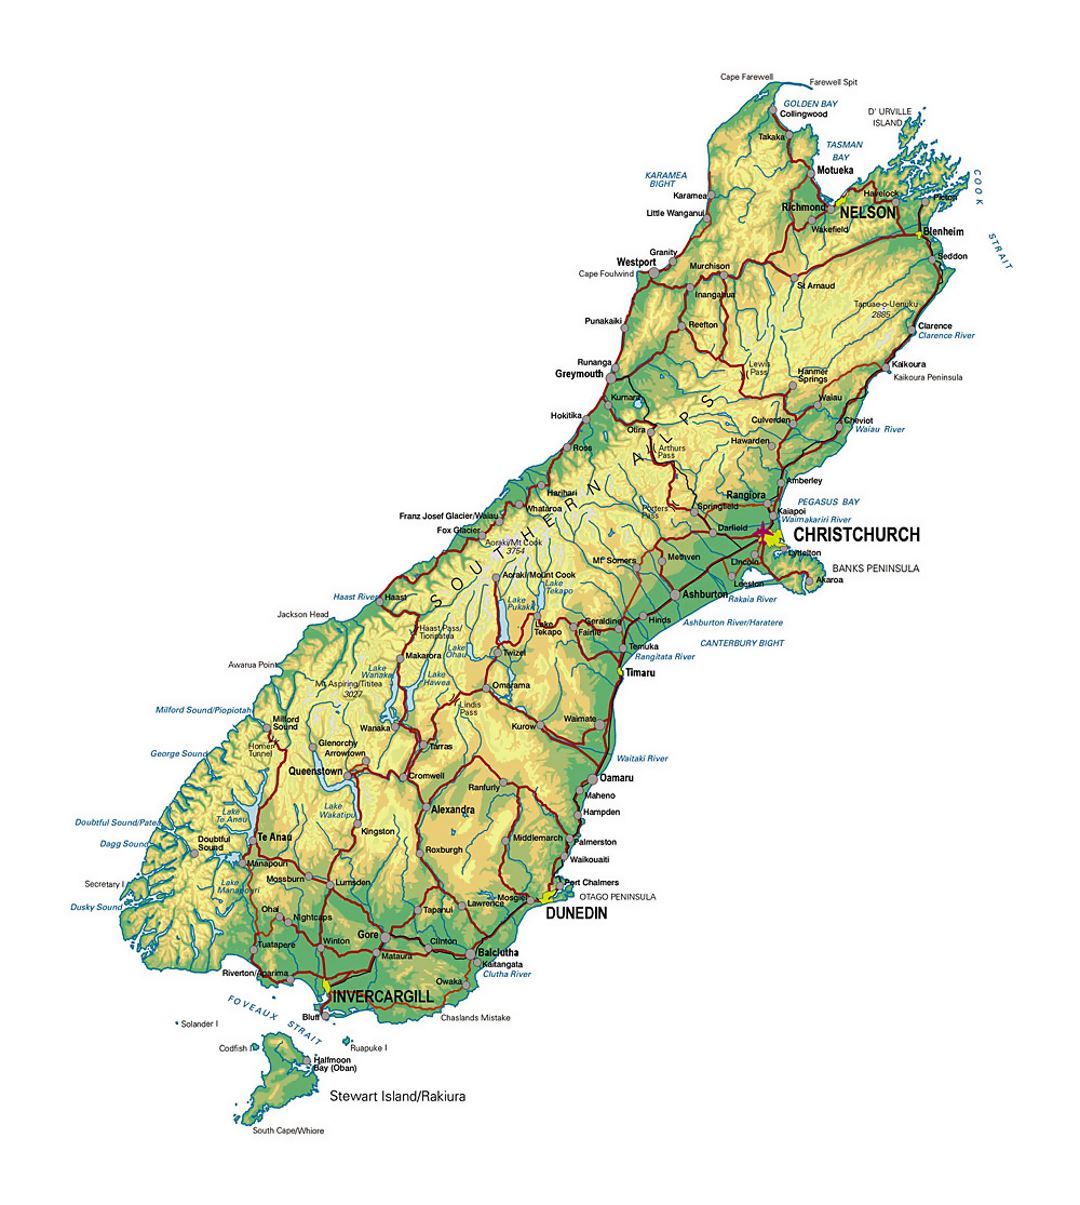 Detailed map of South Island, New Zealand with other marks